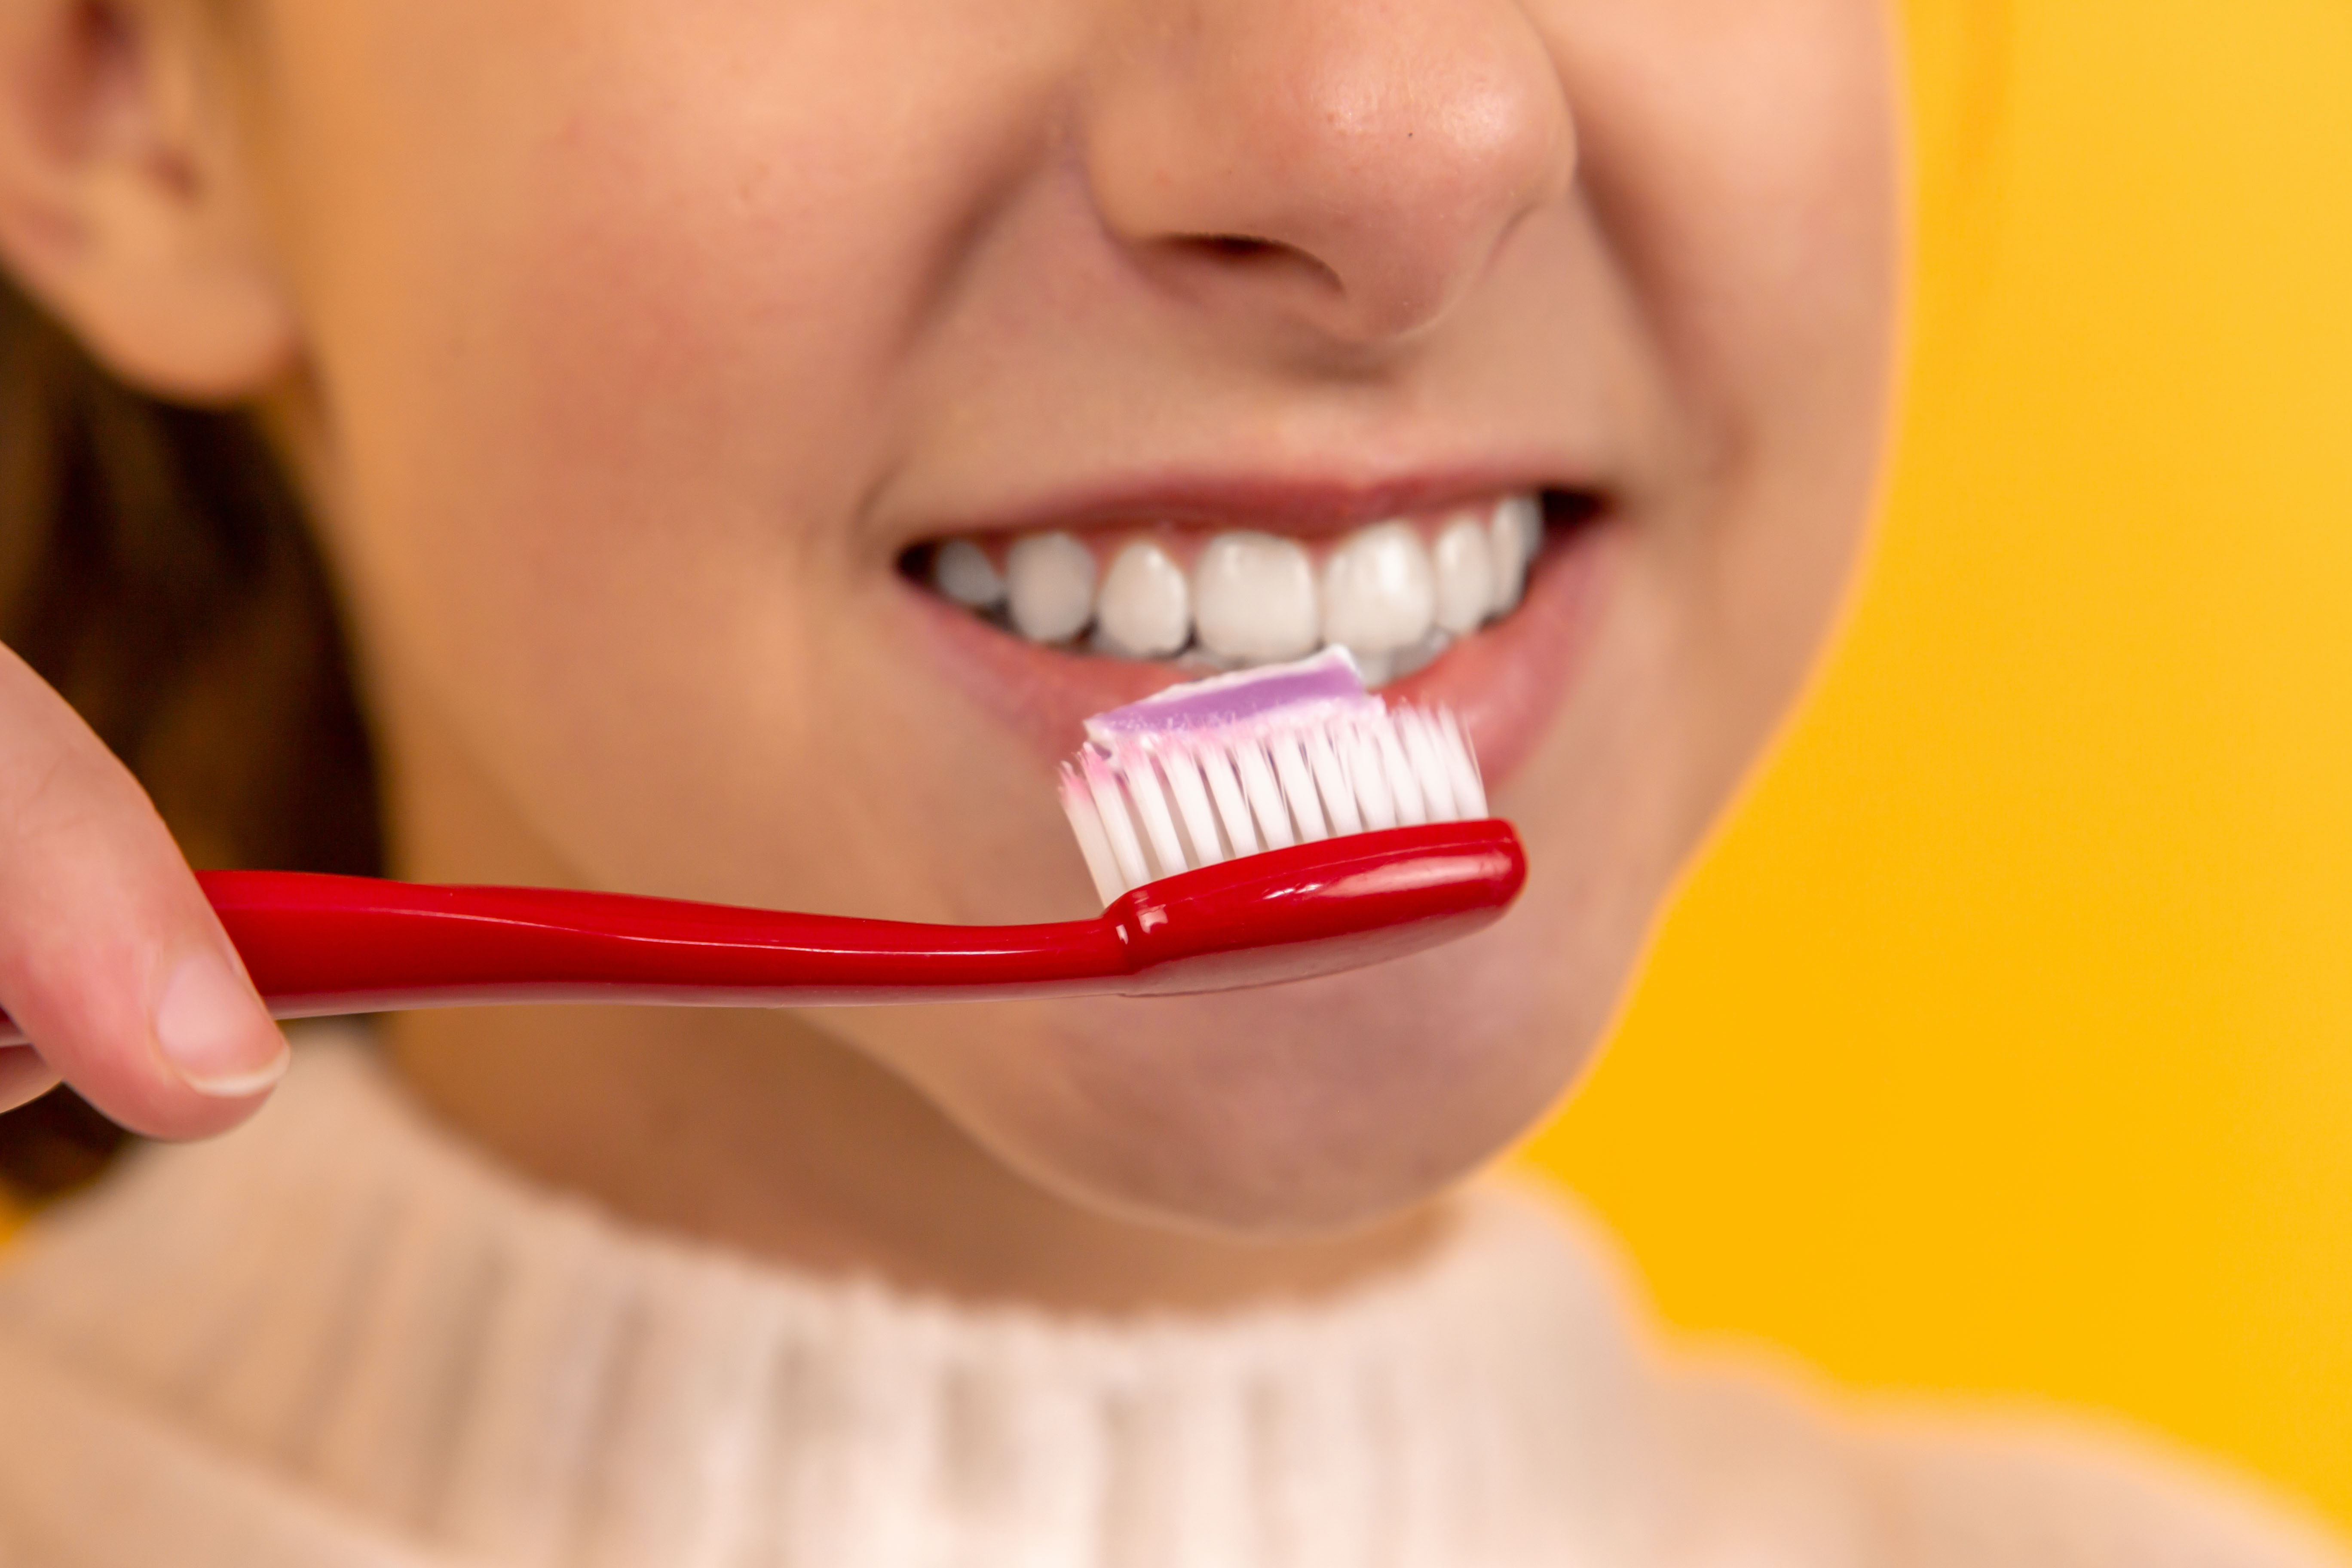 5 Reasons Bleeding Gums Mean It's Time For a visit To the Dentist